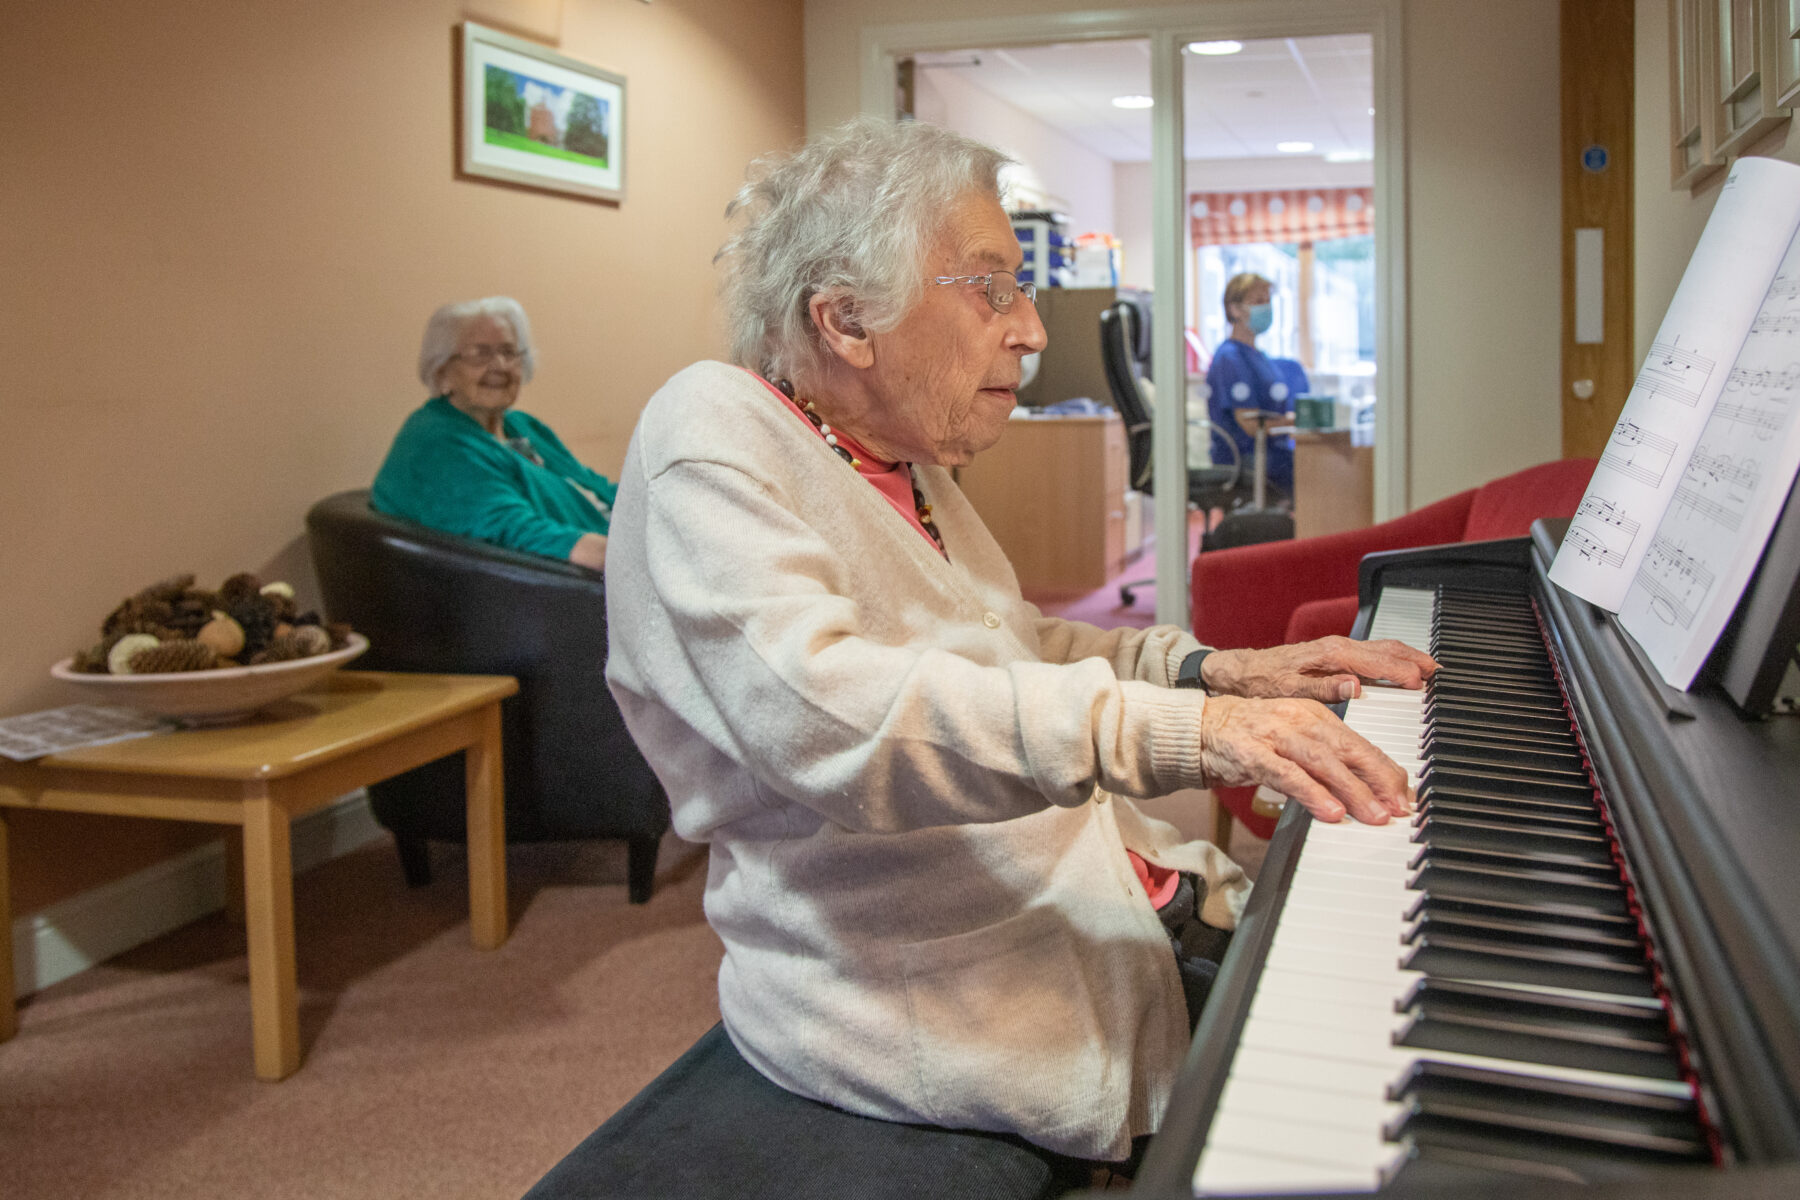 One of the Llys Awelon residents playing the piano